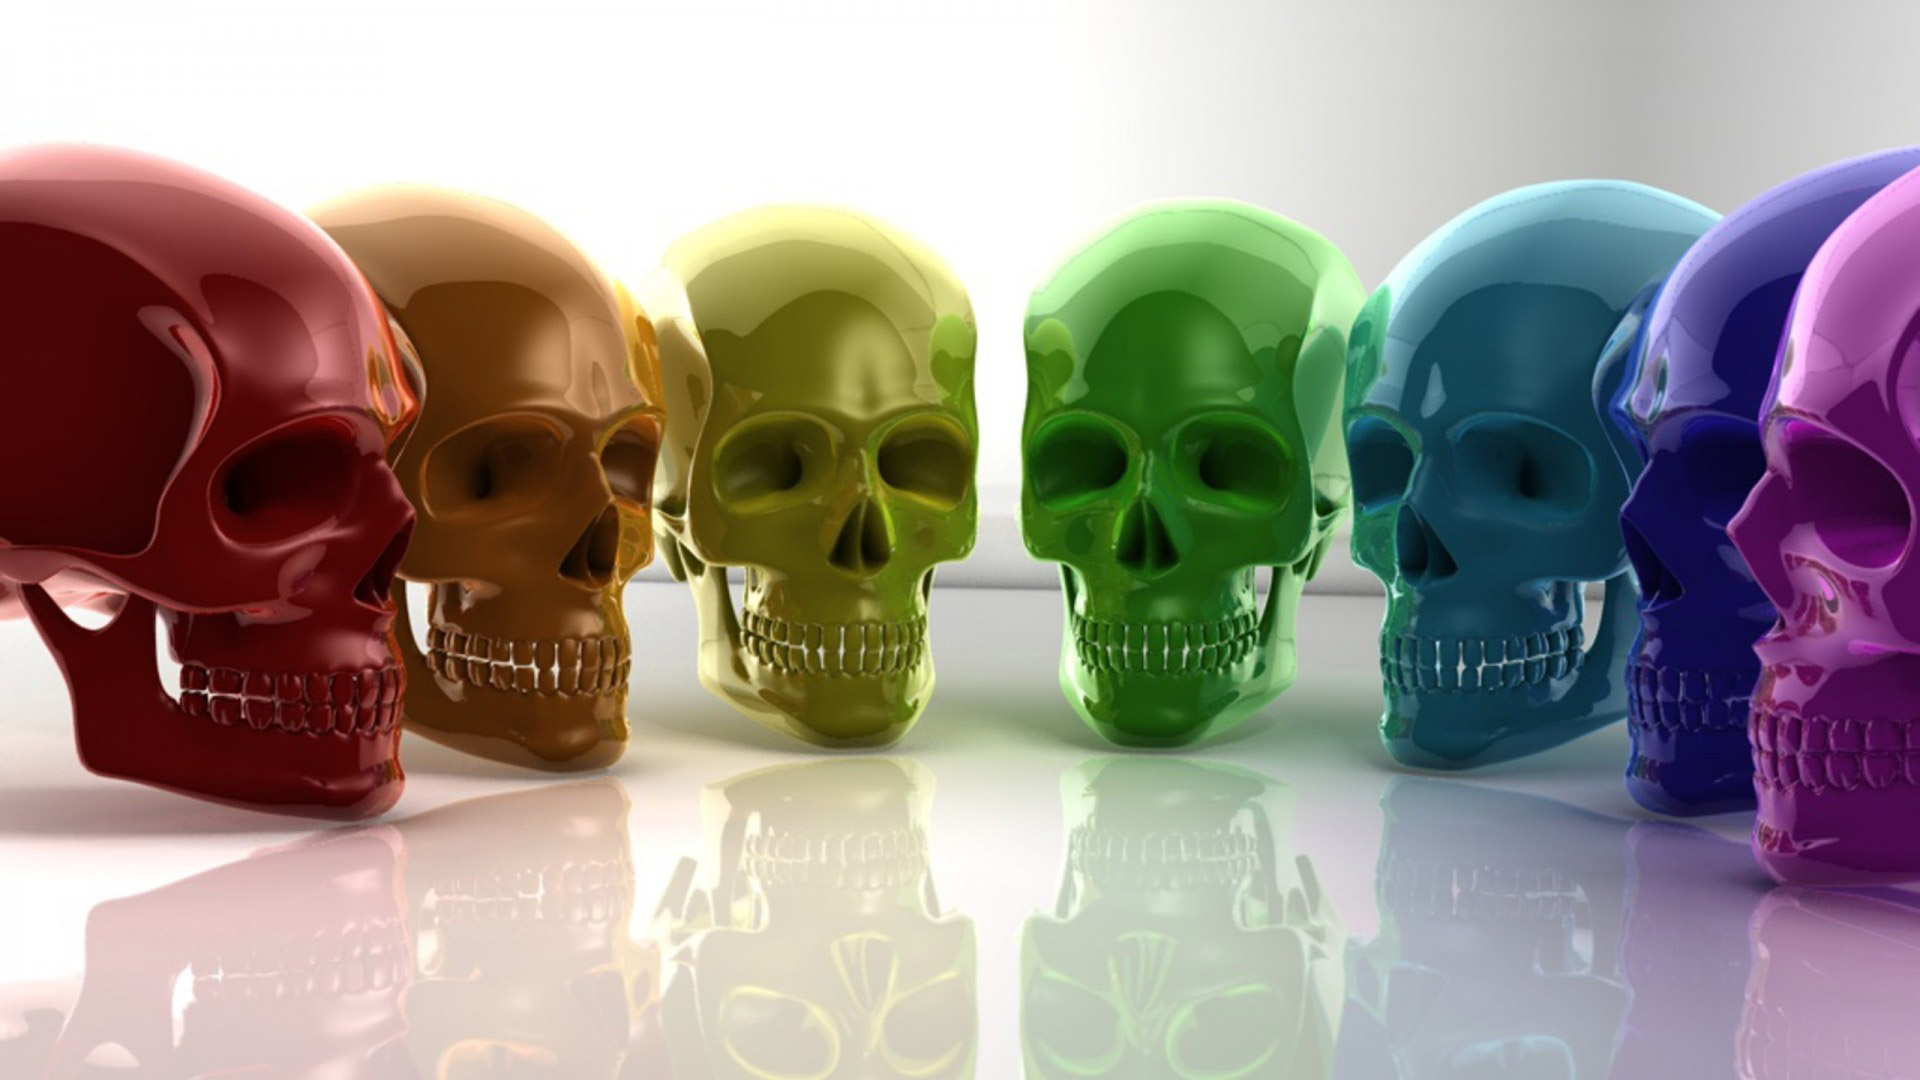 skull colorful wallpapers55com   Best Wallpapers for PCs Laptops